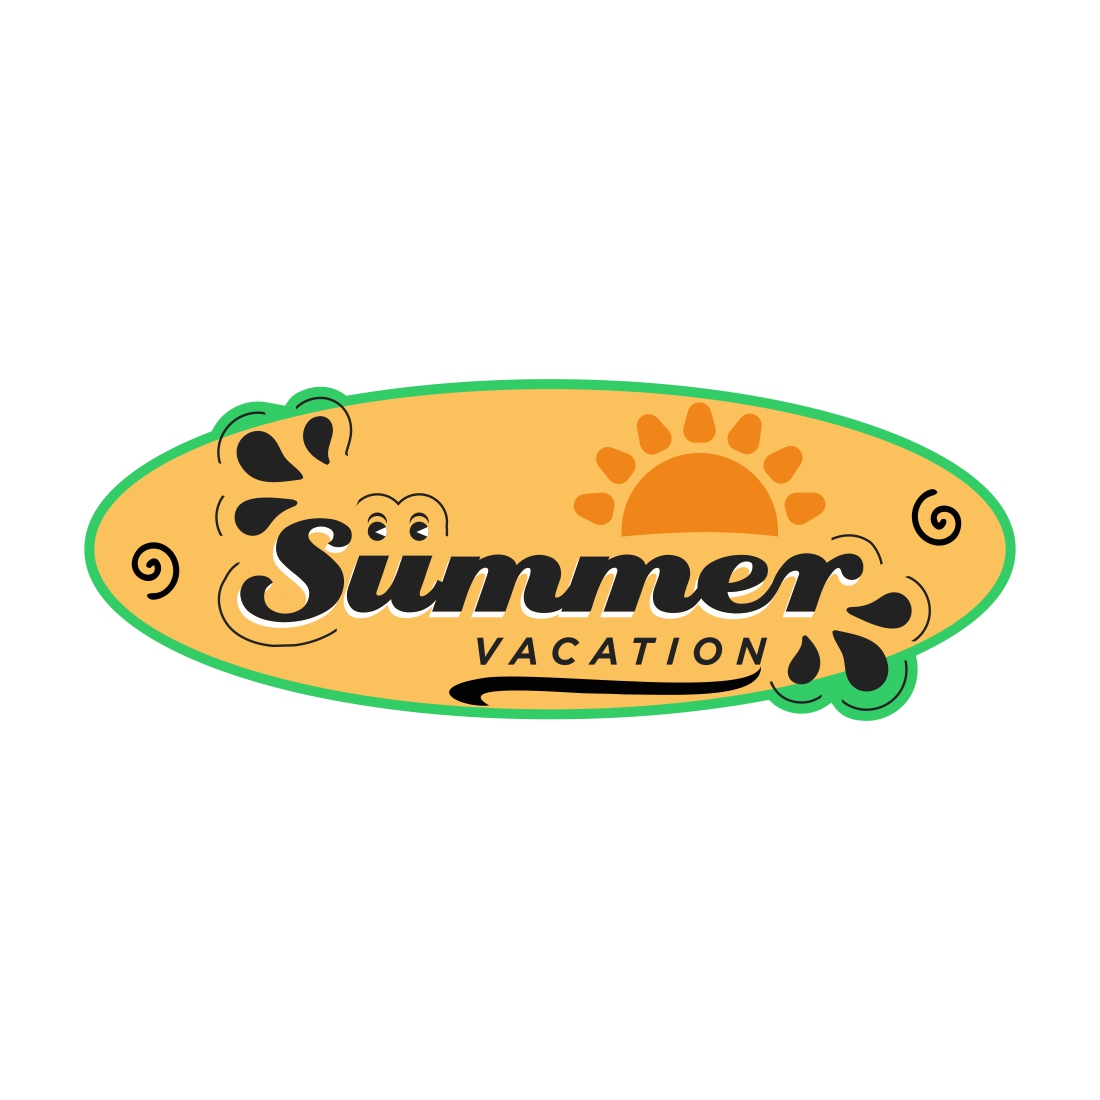 Summer holiday lettering logo with sun vector illustration Summer label, tag, logo, hand lettering for summer vacation, travel, beach holiday preview image.